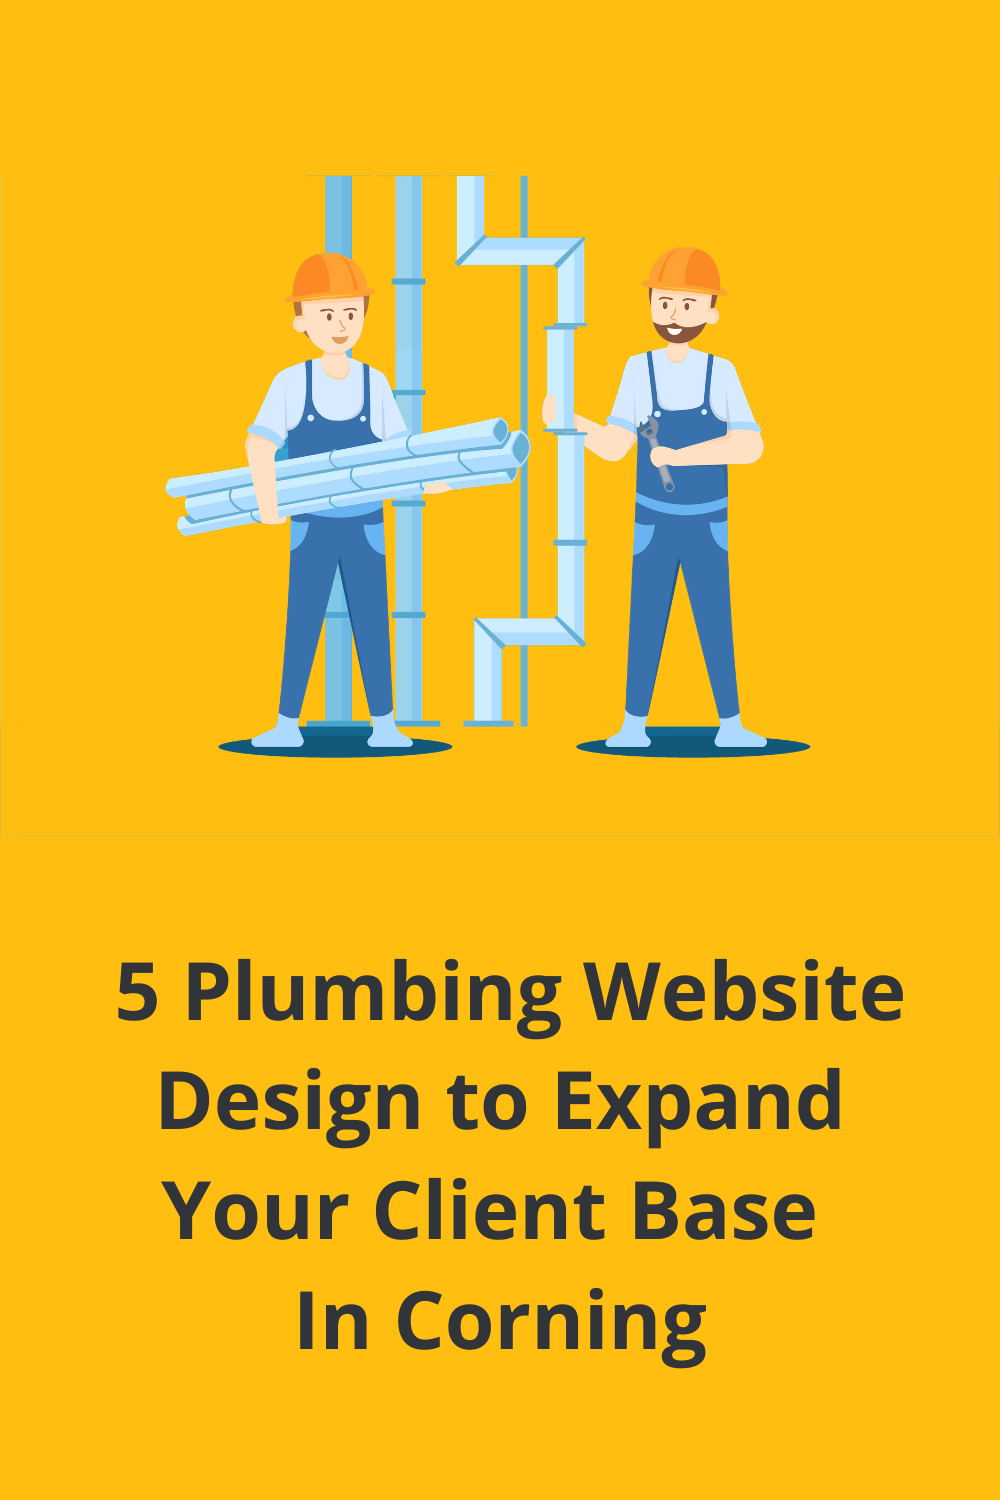 In a competitive plumbing industry, standing out from the crowd is the only way to succeed. Below are some of the Plumbing Web Designs that can help expand your client base. via @scopedesign